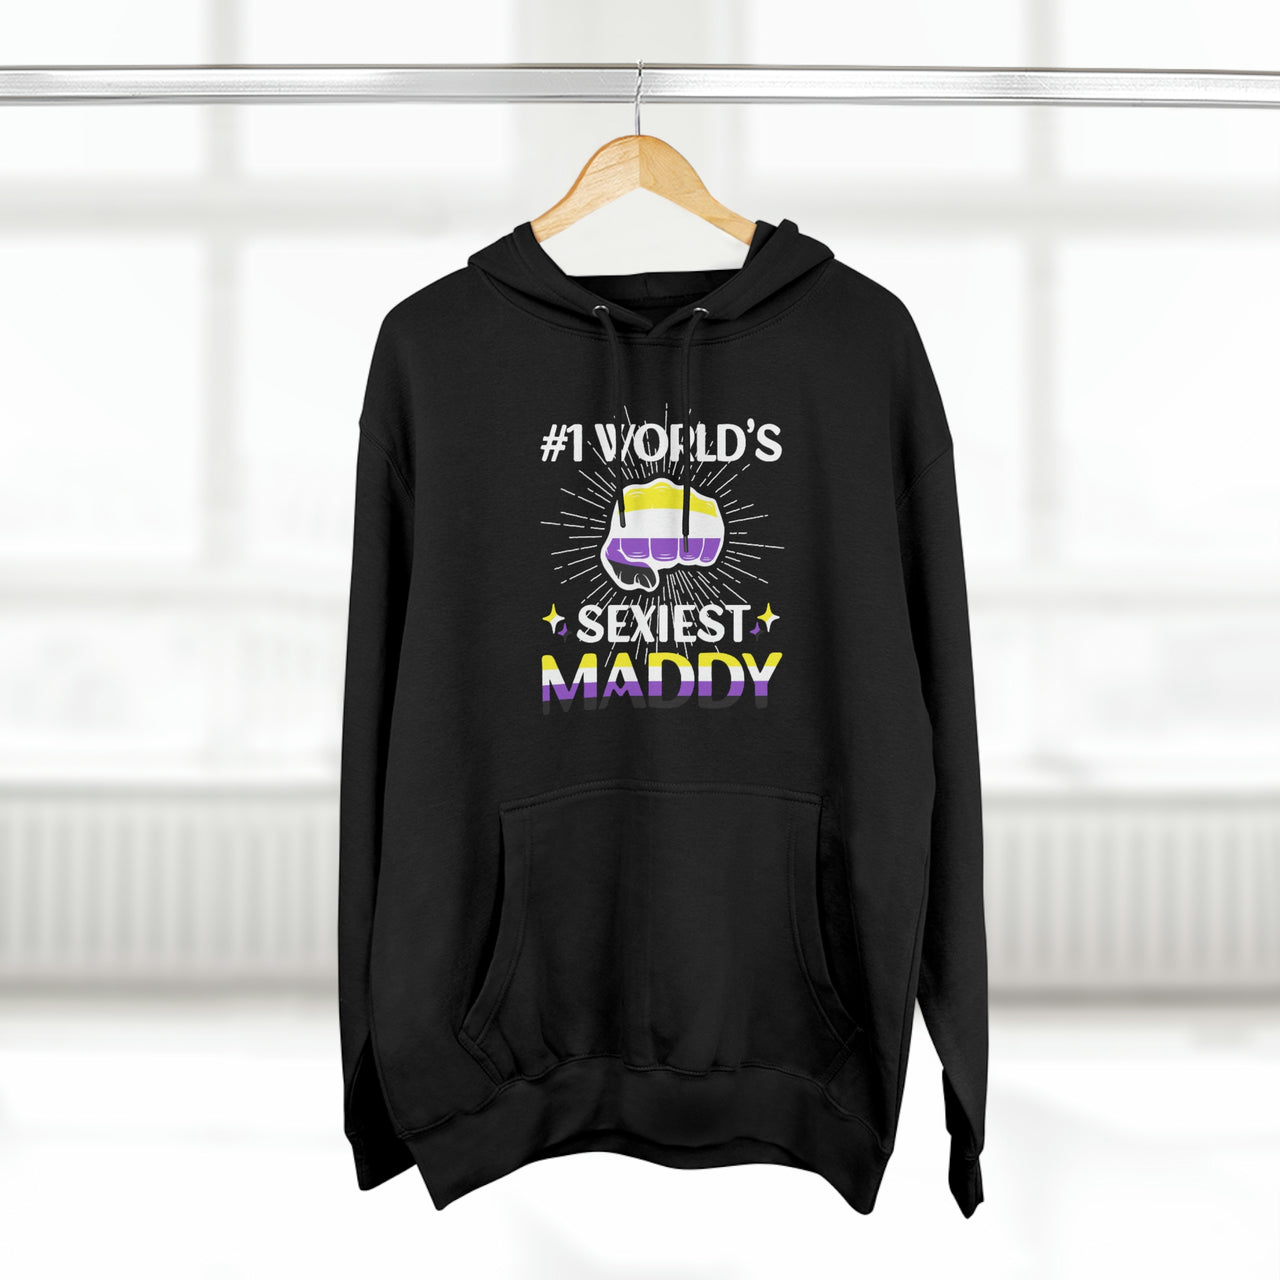 Nonbinary Flag Mother's Day Unisex Premium Pullover Hoodie - #1 World's Gayest Mom Printify